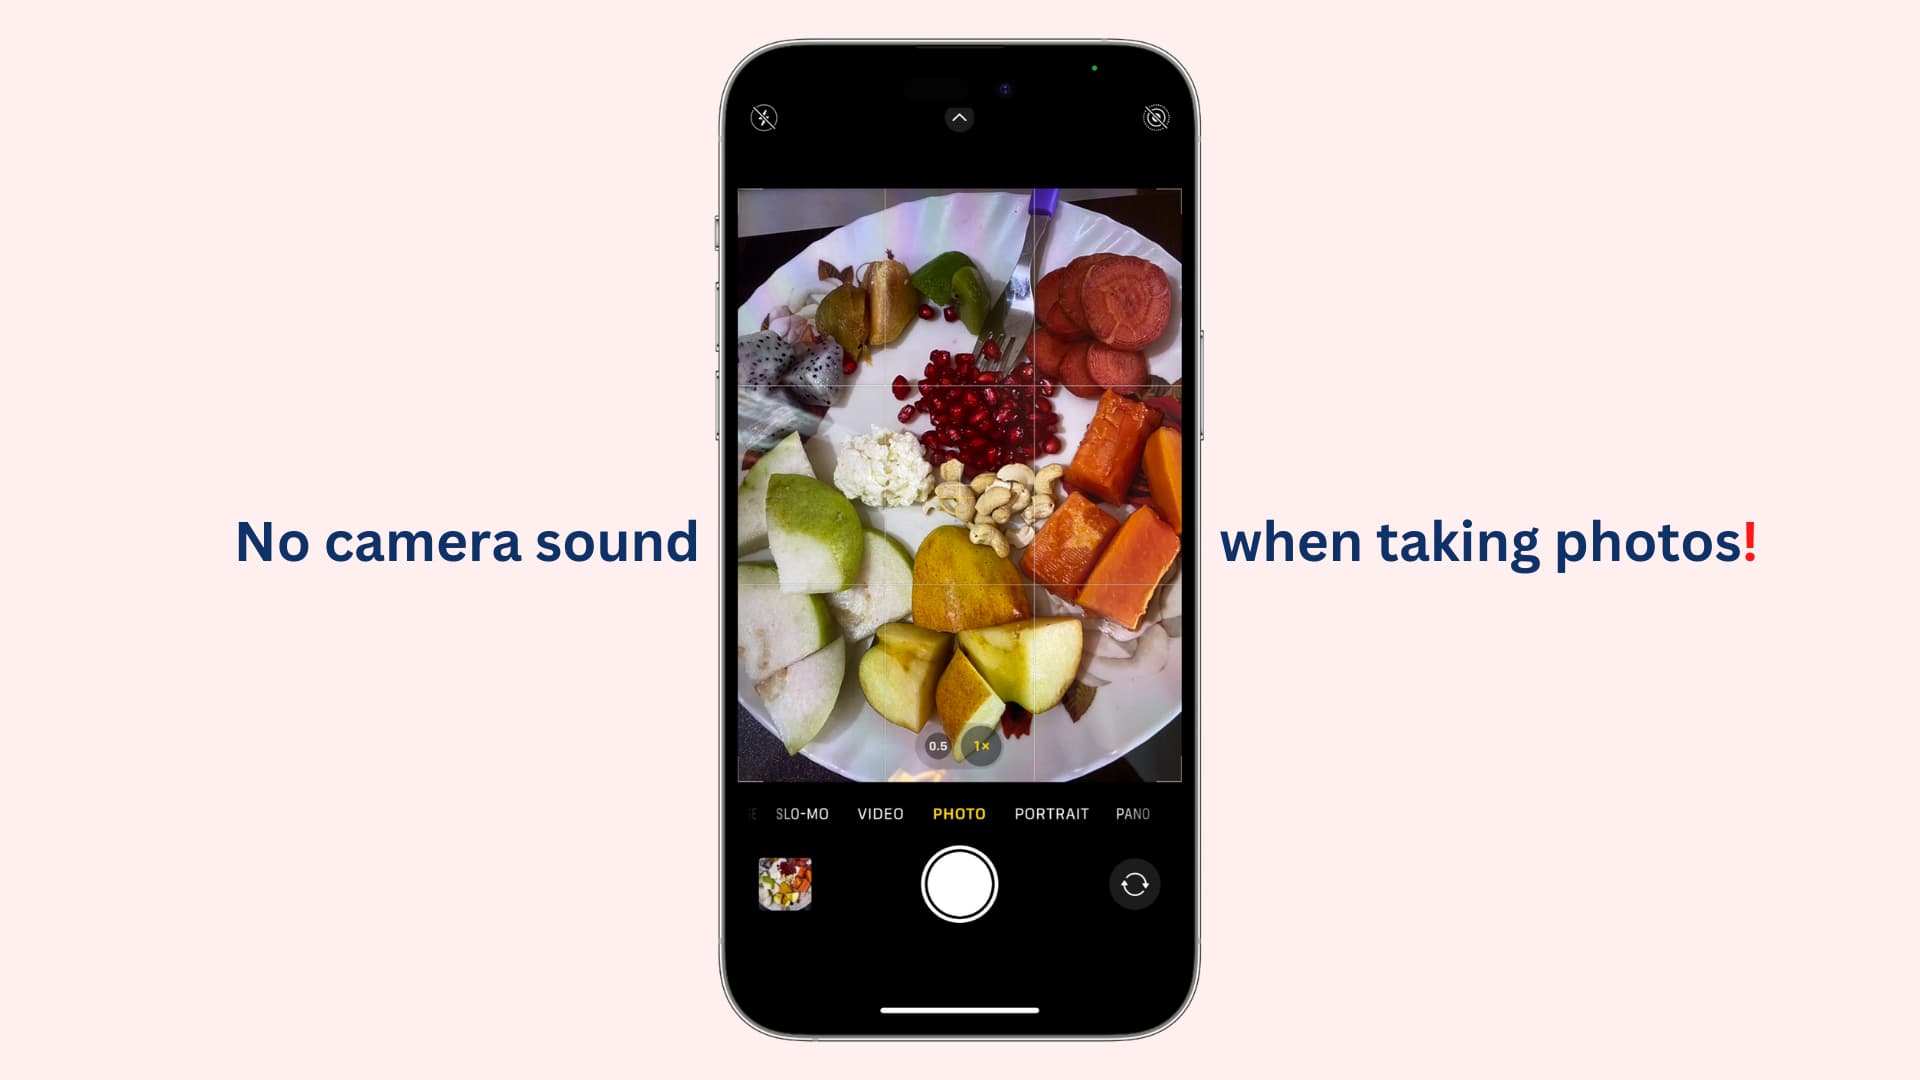 Mute iPhone camera sound when taking photos